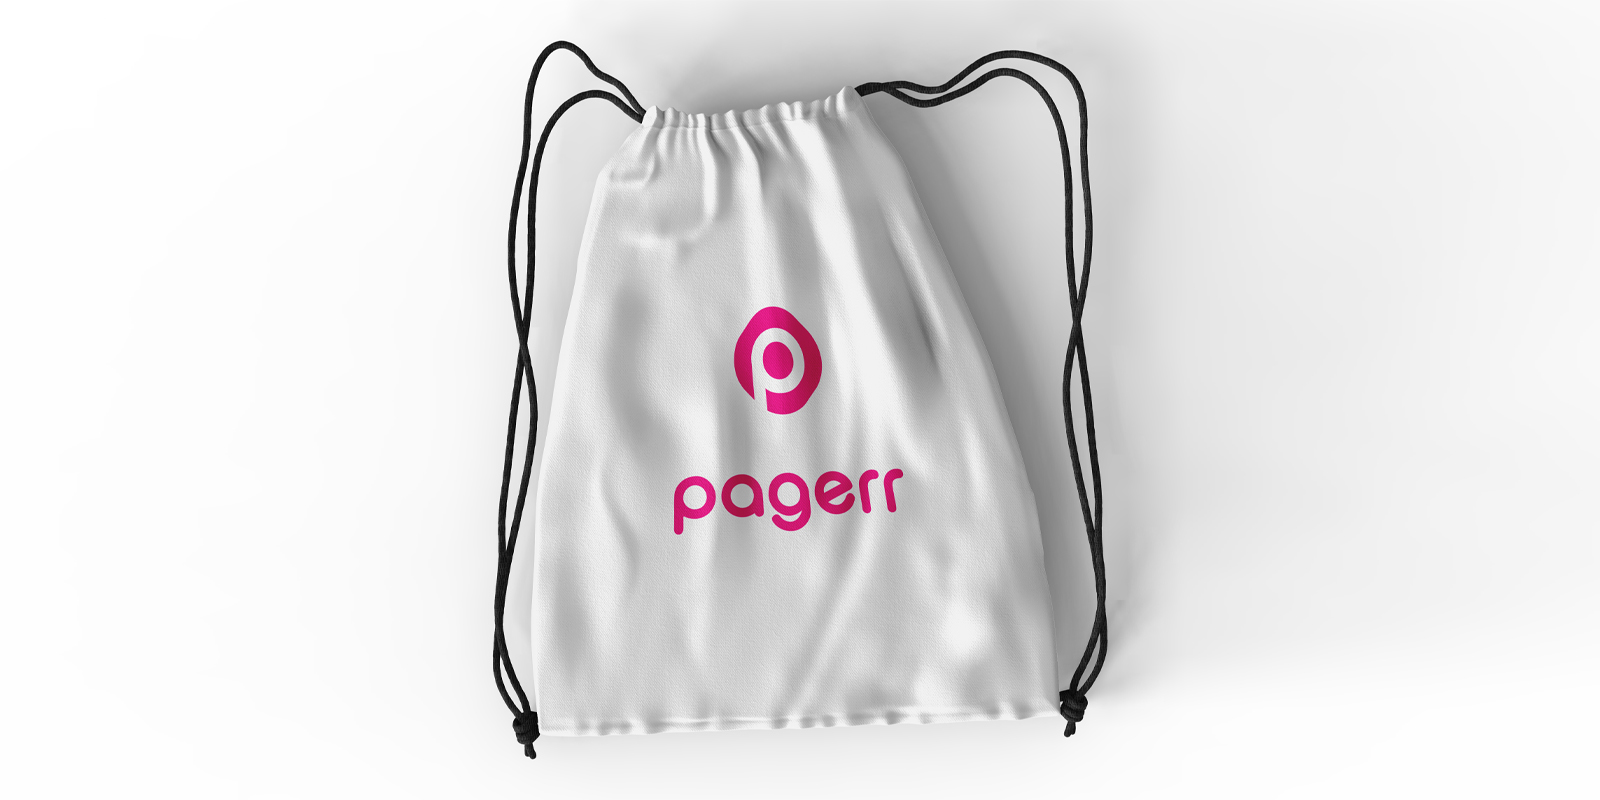 Drawstring backpacks in Tallinn - Print with Pagerr